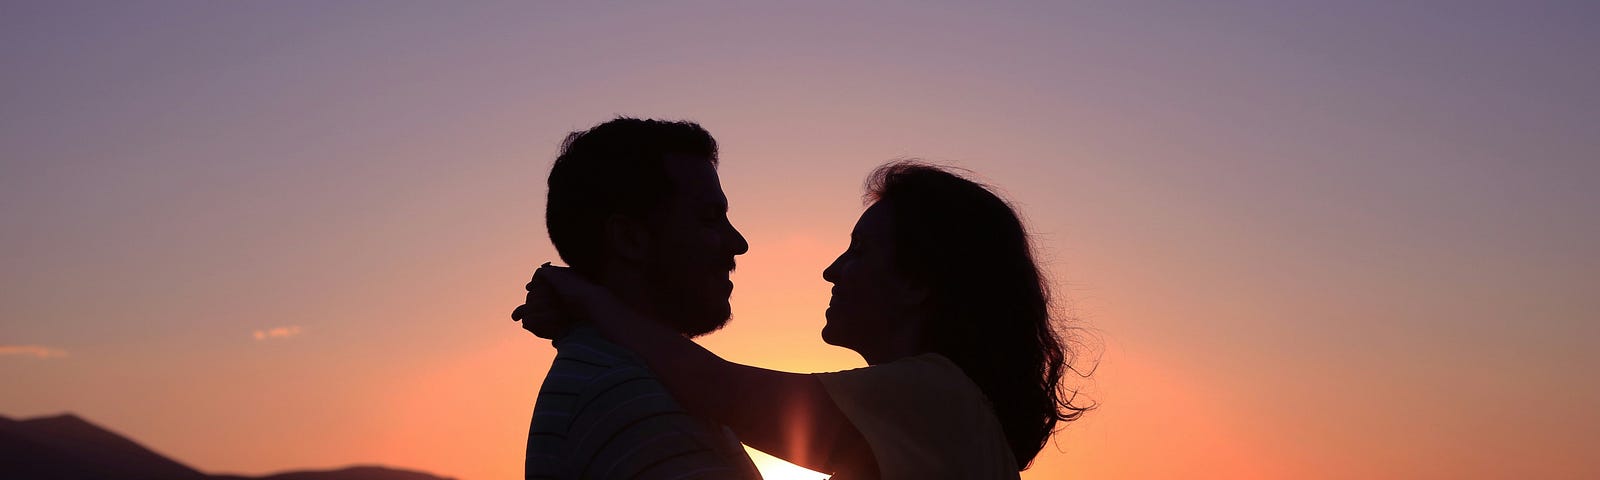 Man and woman holding each other and looking into each other’s eyes at sunset